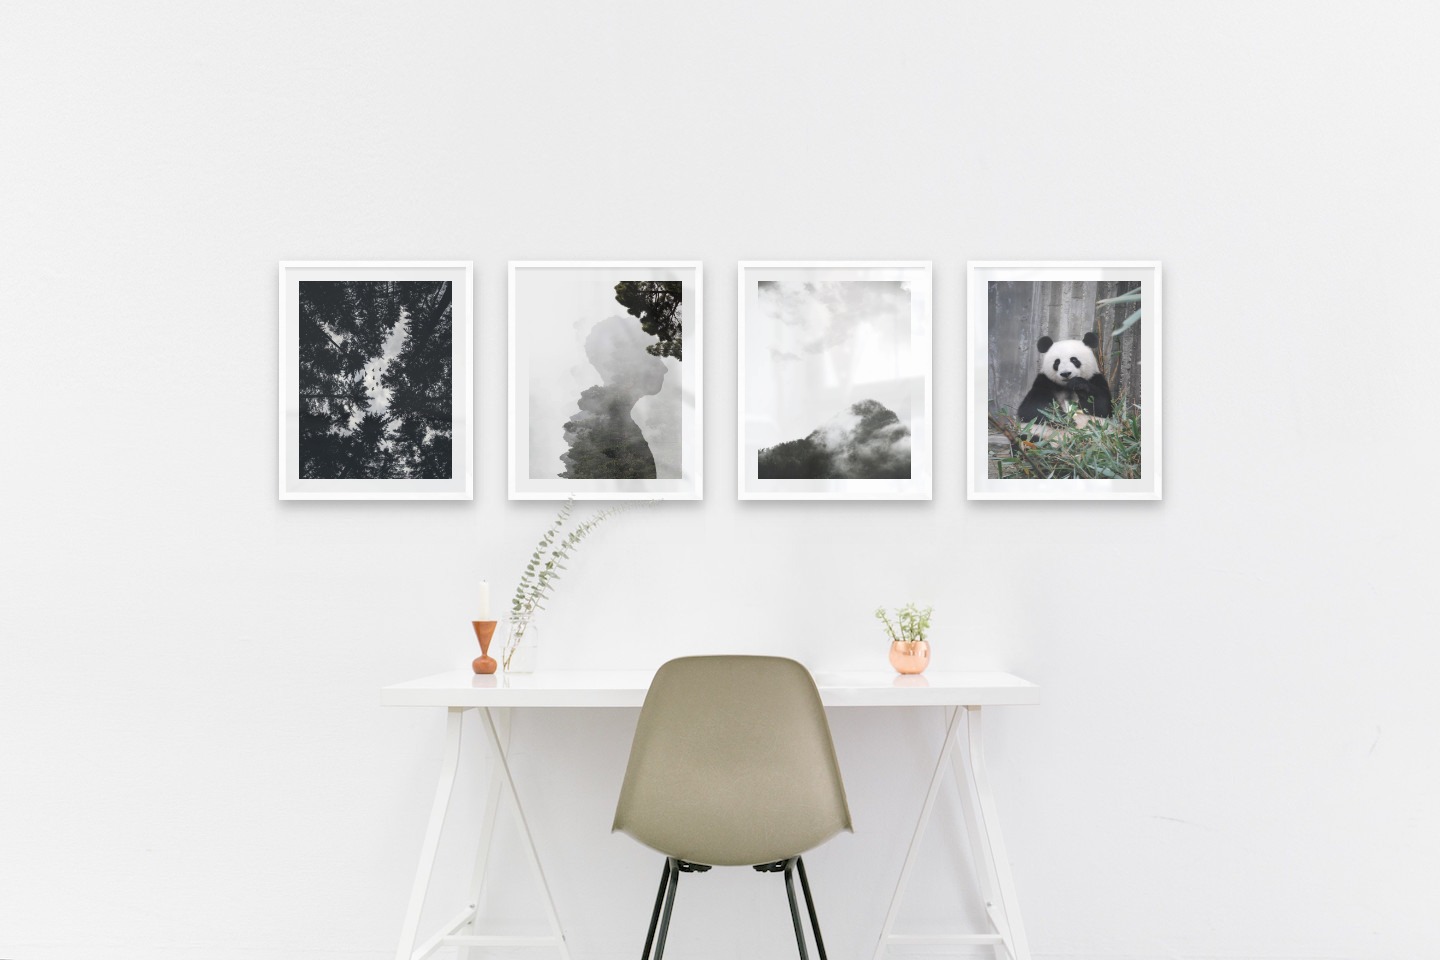 Gallery wall with picture frames in white in sizes 40x50 with prints "Wooden tops and birds", "Silhouette and tree", "Trees and mountains in fog" and "Panda"